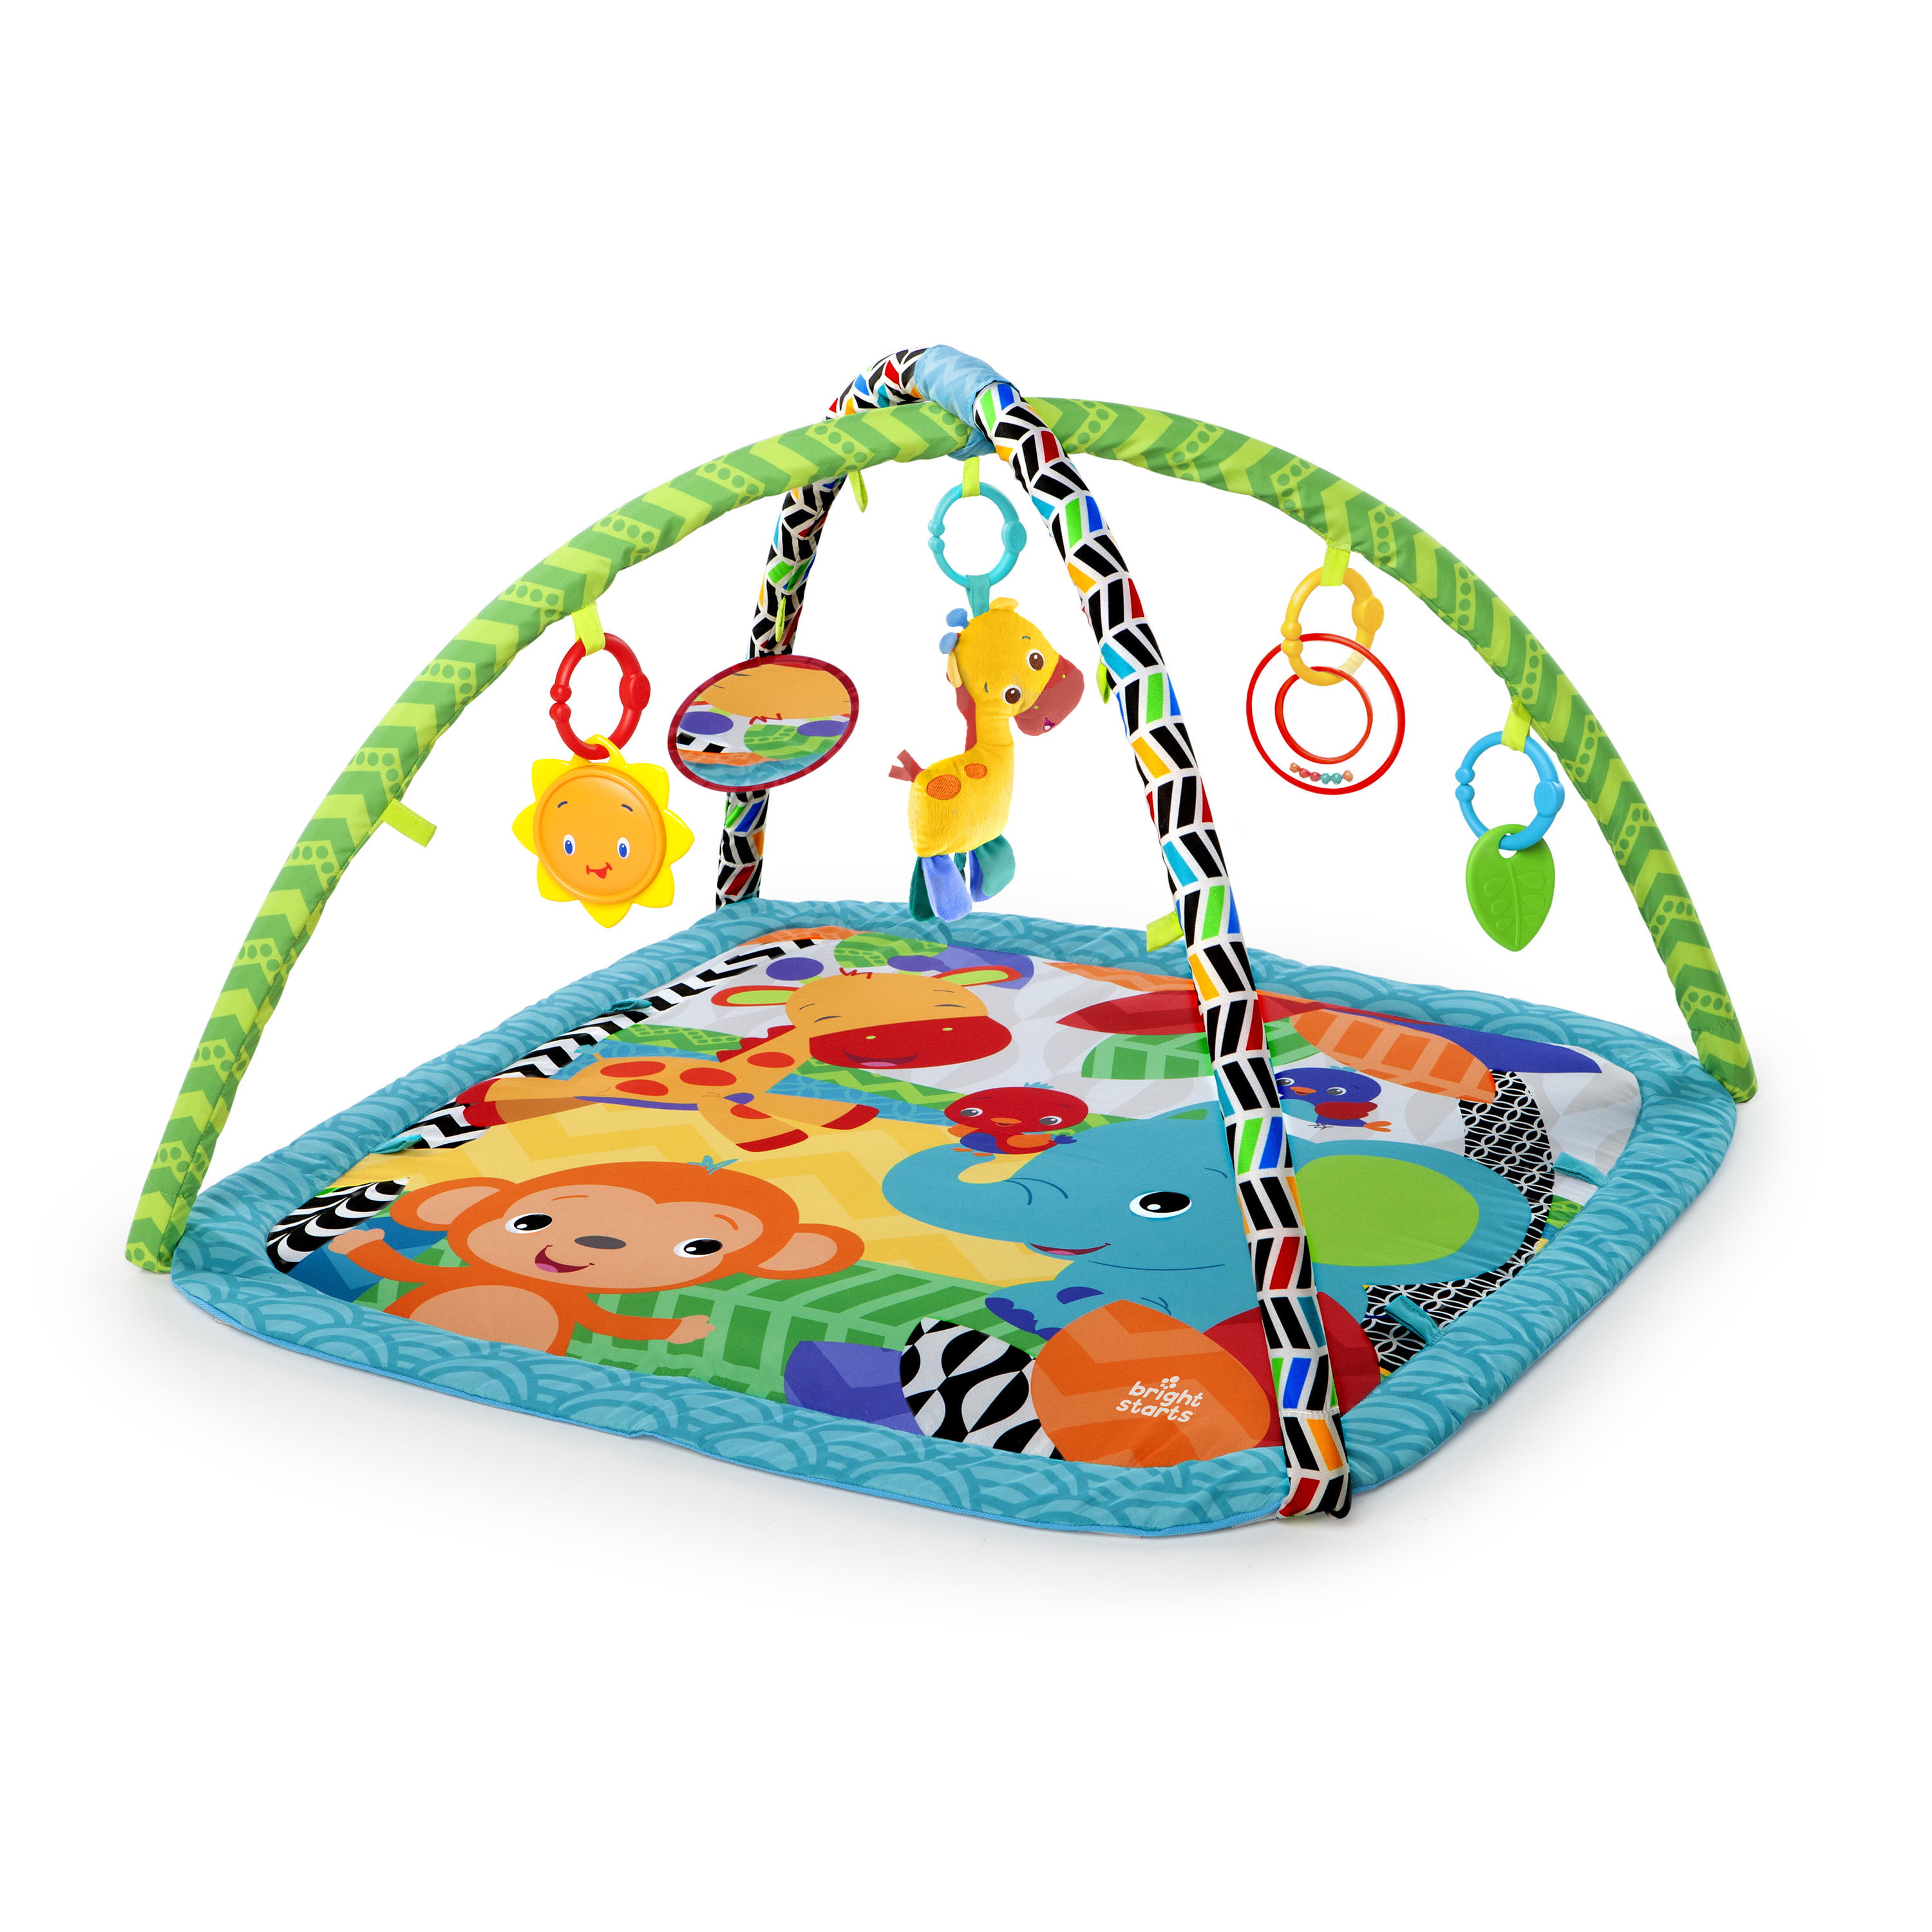 bright star 5 in 1 activity gym